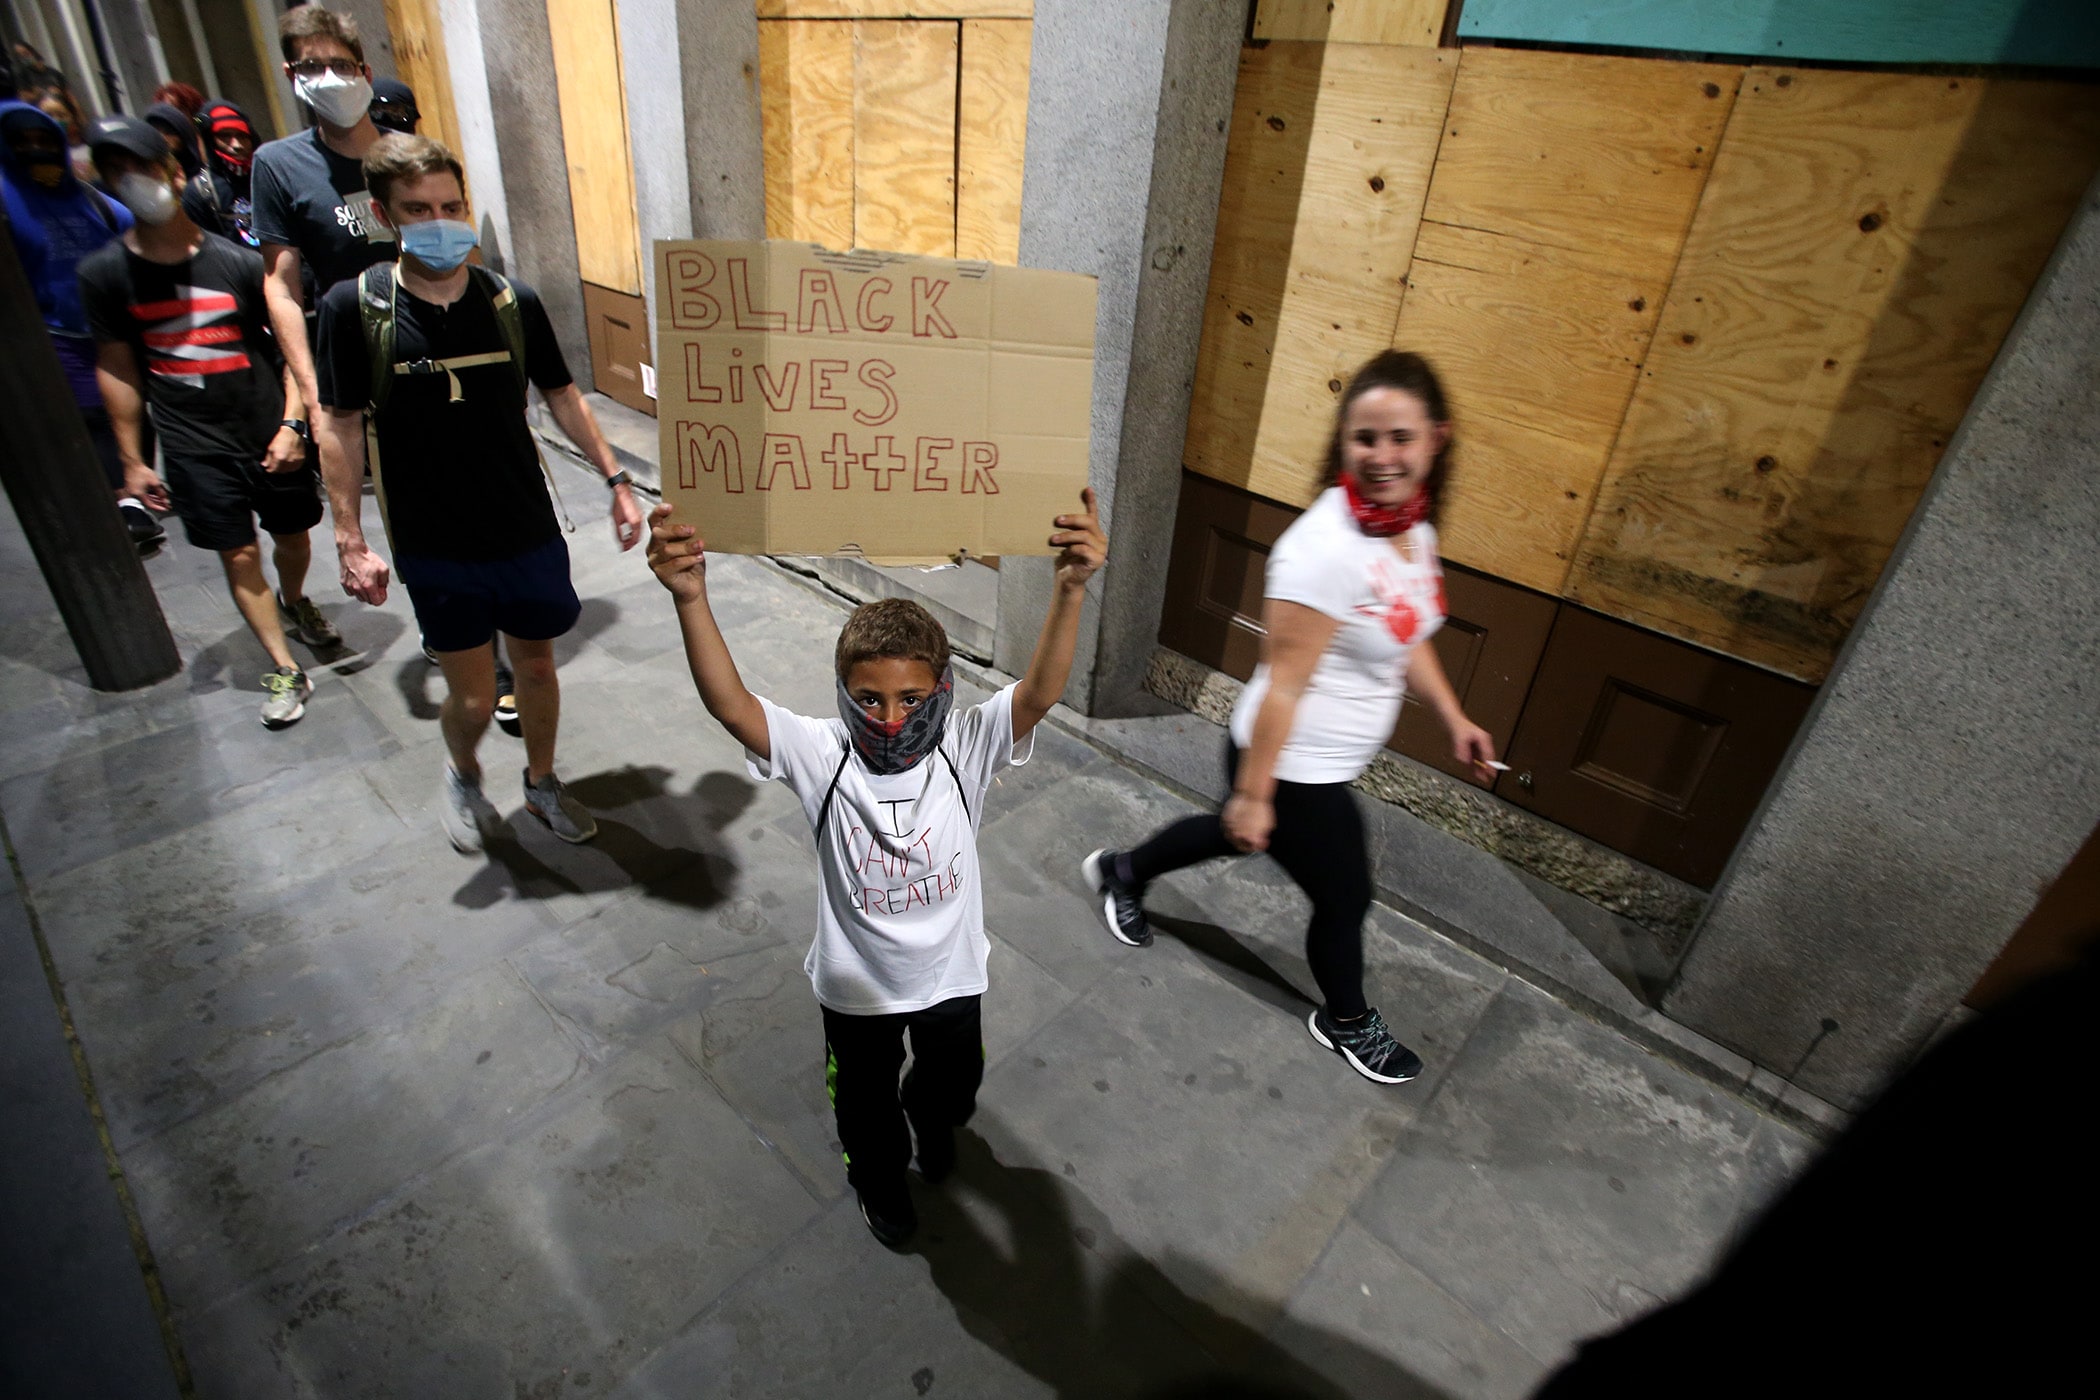 Protestors march past St. Louis Cathedral after a rally outside Jackson Square to protest the killing by police of George Floyd and others. Photographed on Friday, June 5, 2020. (Photo by Michael DeMocker)